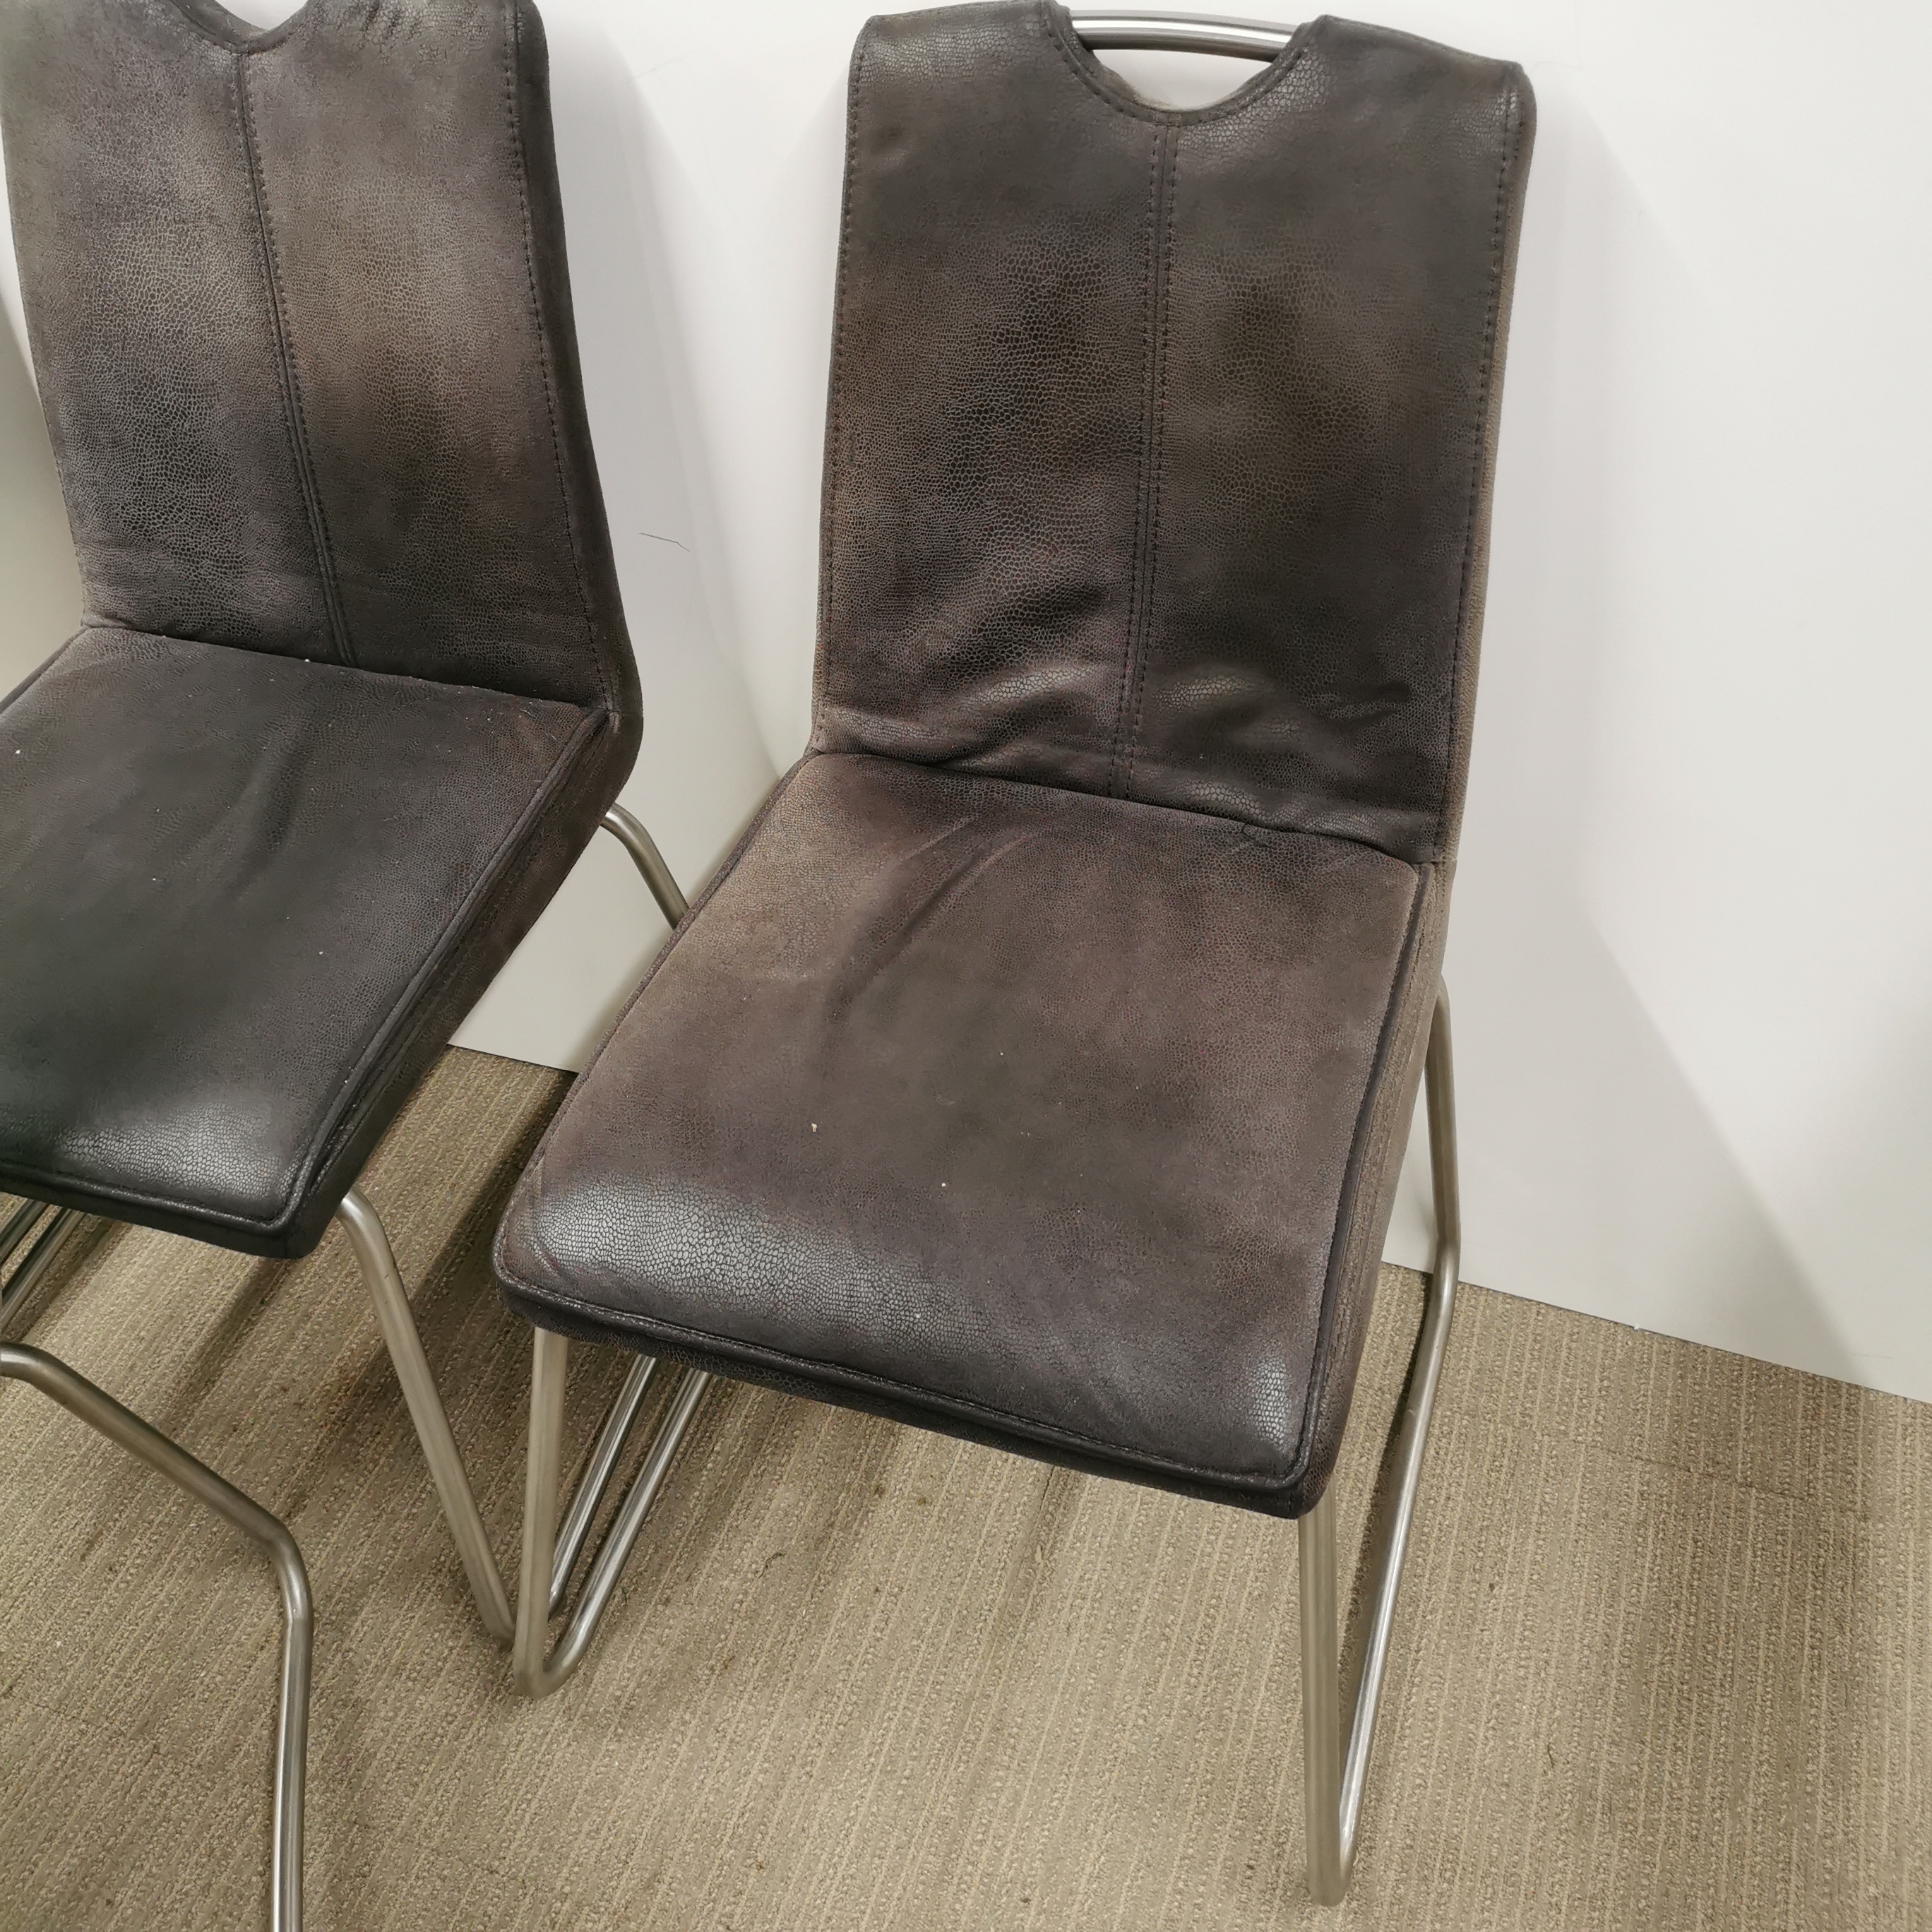 A set of four chrome and snakeskin texture leather dining chairs. - Image 2 of 2